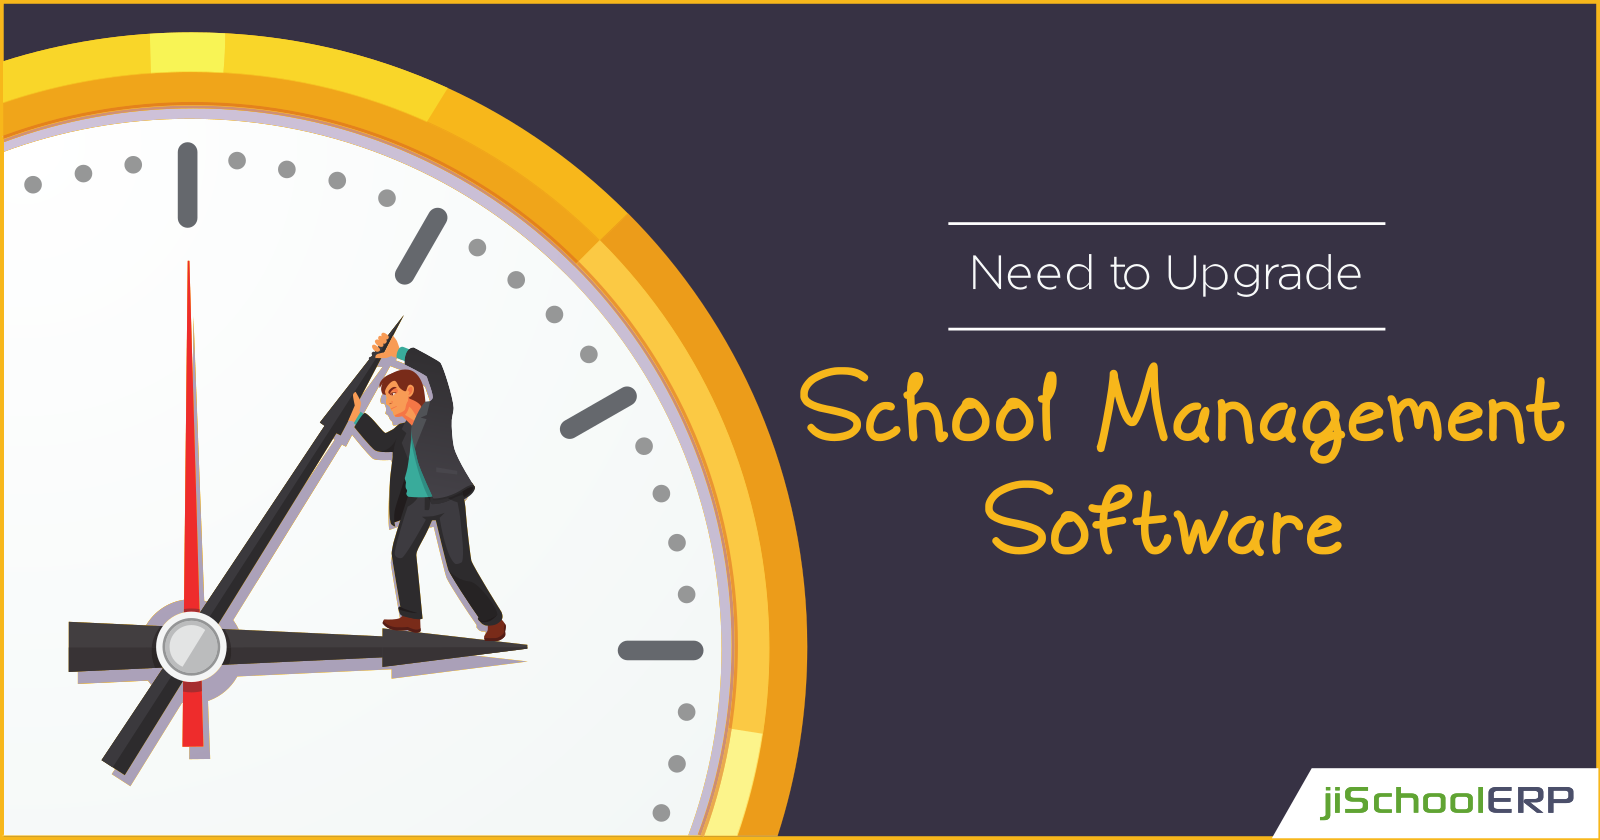 Signs Suggesting You Need to Upgrade Your School Management Software